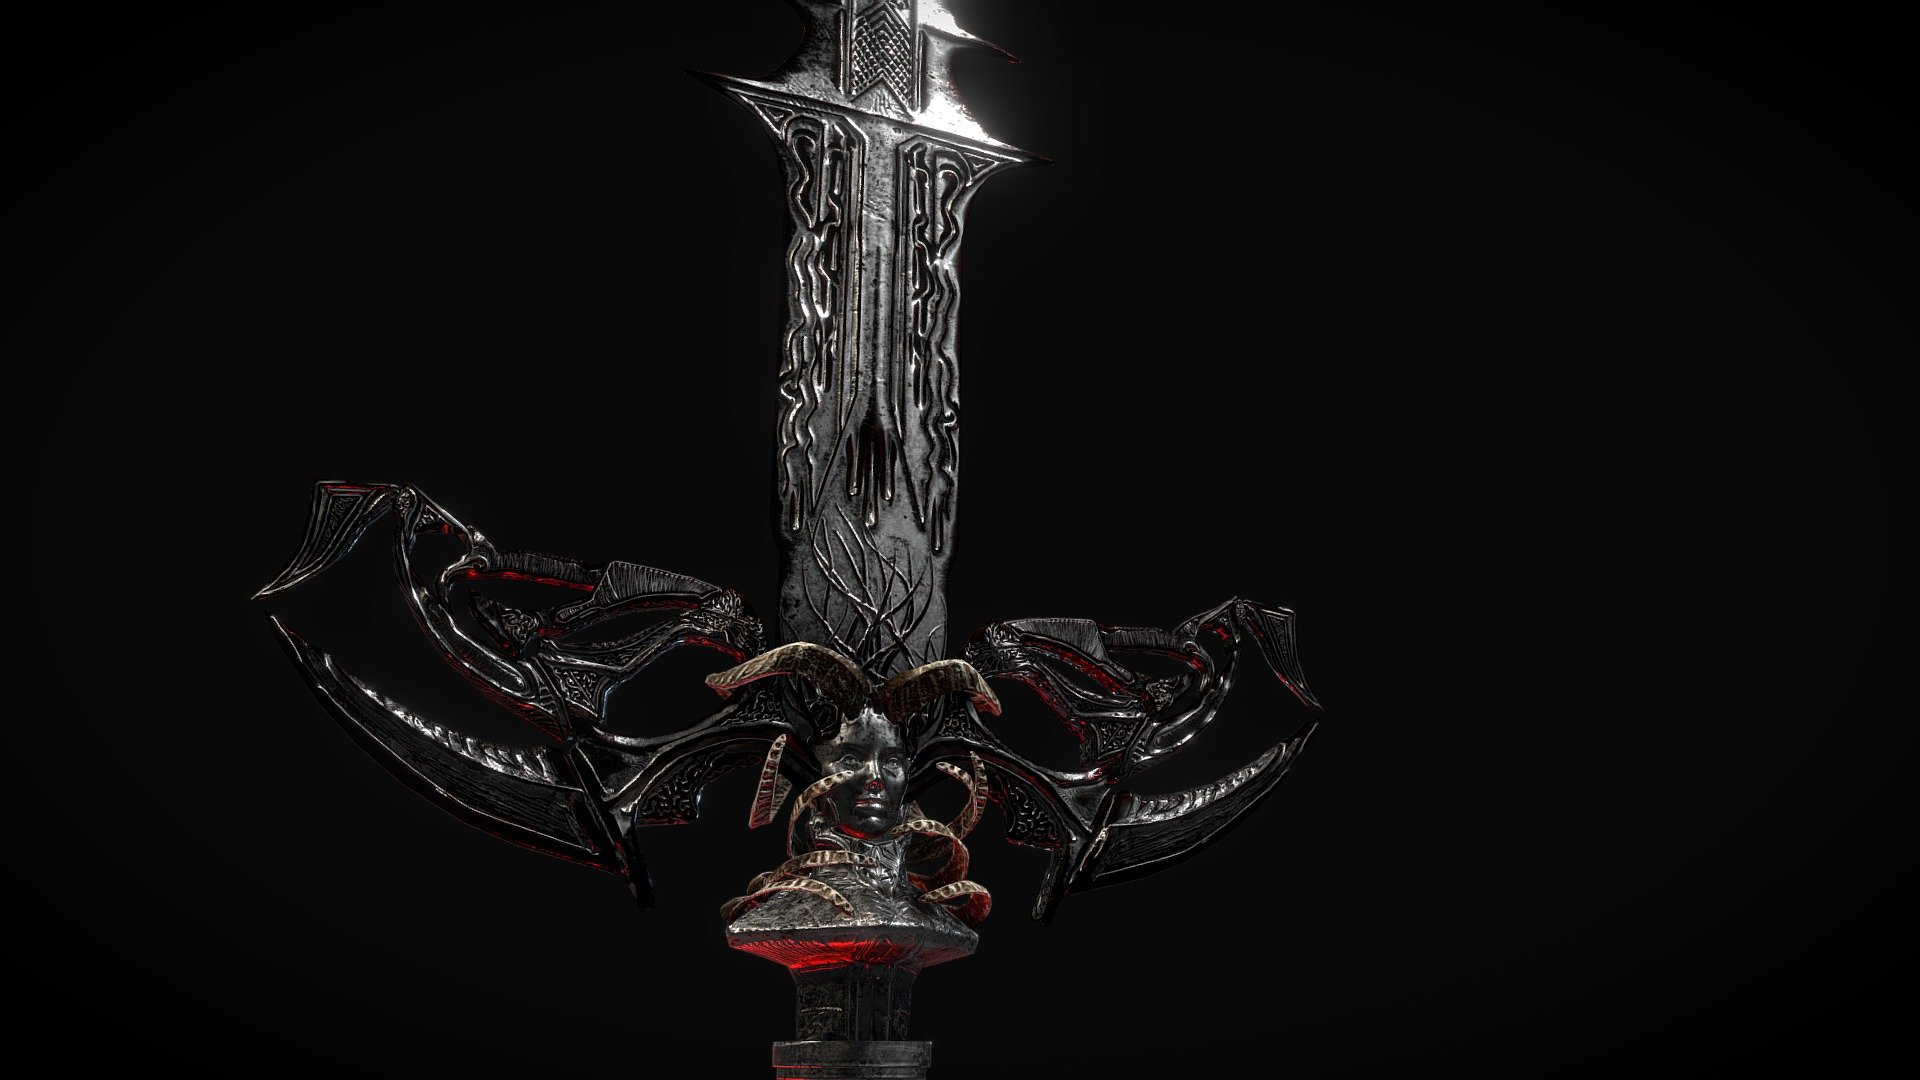 An Artifact Weapon that thirsts for blood. Any who wield this can feel its power and some take advantage of its blood draining ability to hide devastating attacks that would normally leave a bloody aftermath.
Origins: Unkown - Akeldema the Draining Blade - 3D model by Derrick Storm Bilodeau (@derrick.storm) 3d model